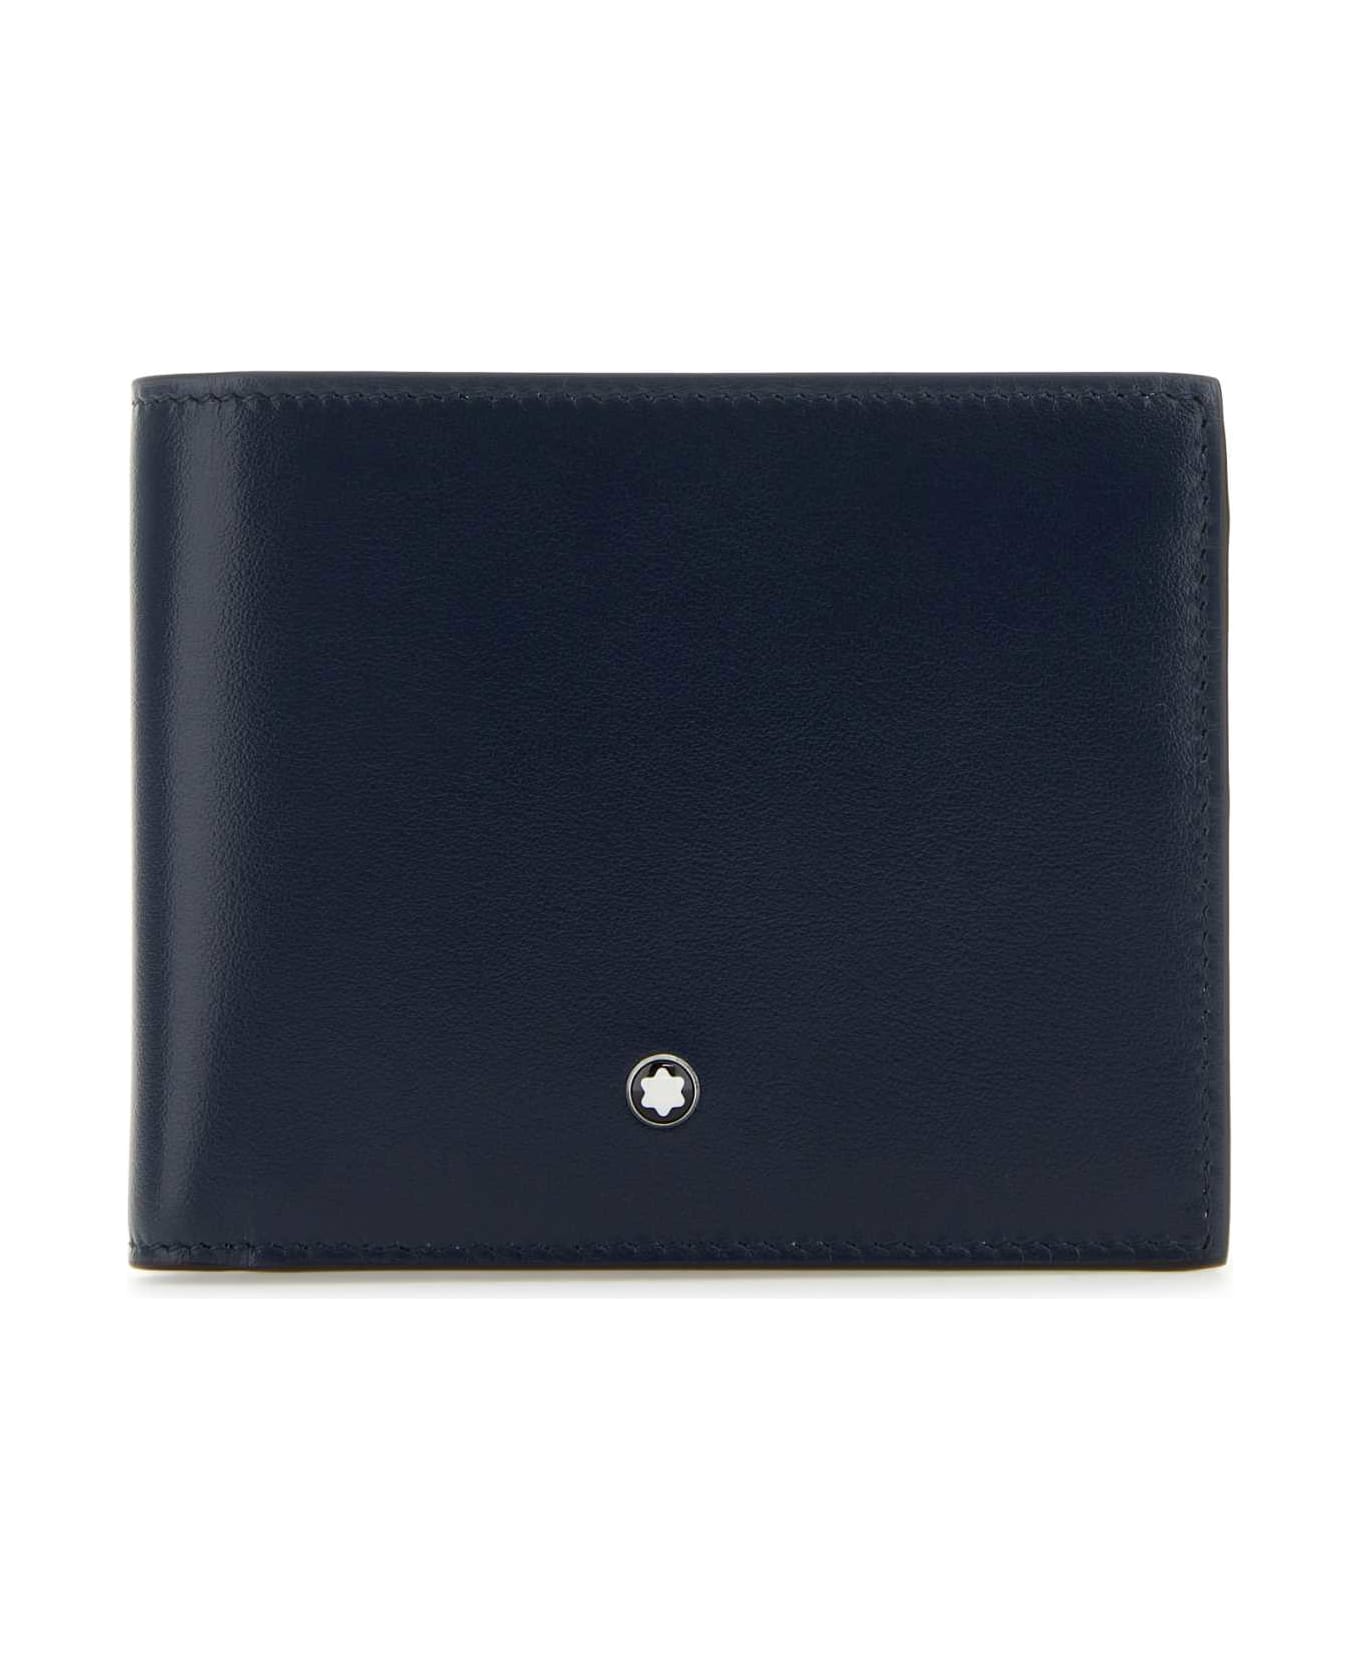 Montblanc Blue Leather Wallet - INKBLUE 財布